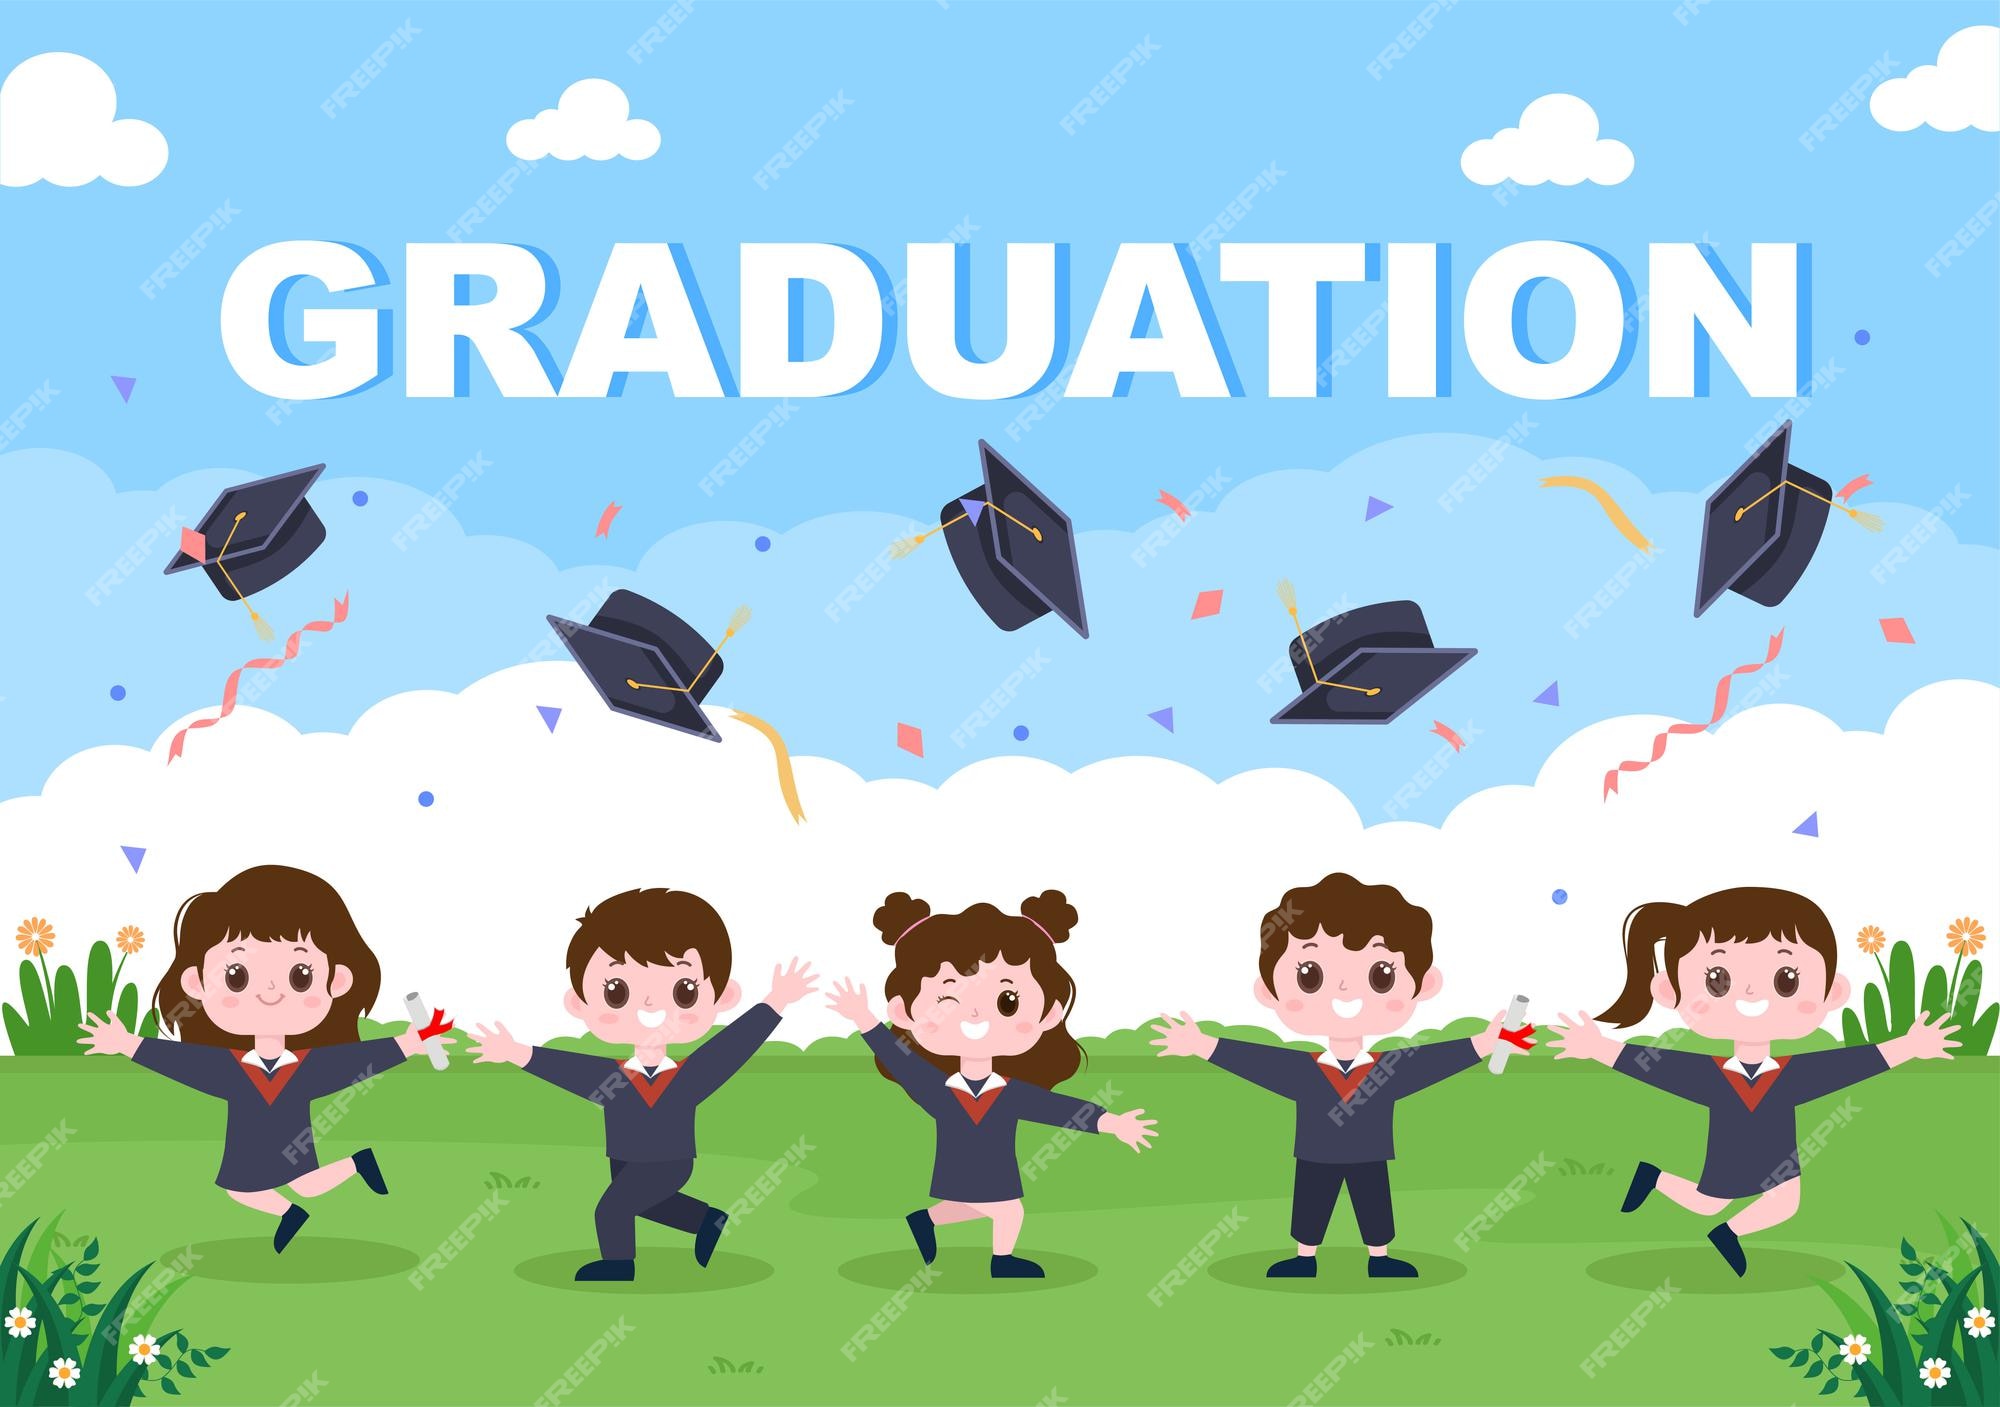 Premium Vector | Happy graduation day of students celebrating background  vector illustration wearing academic dress, graduate cap and holding  diploma in flat style